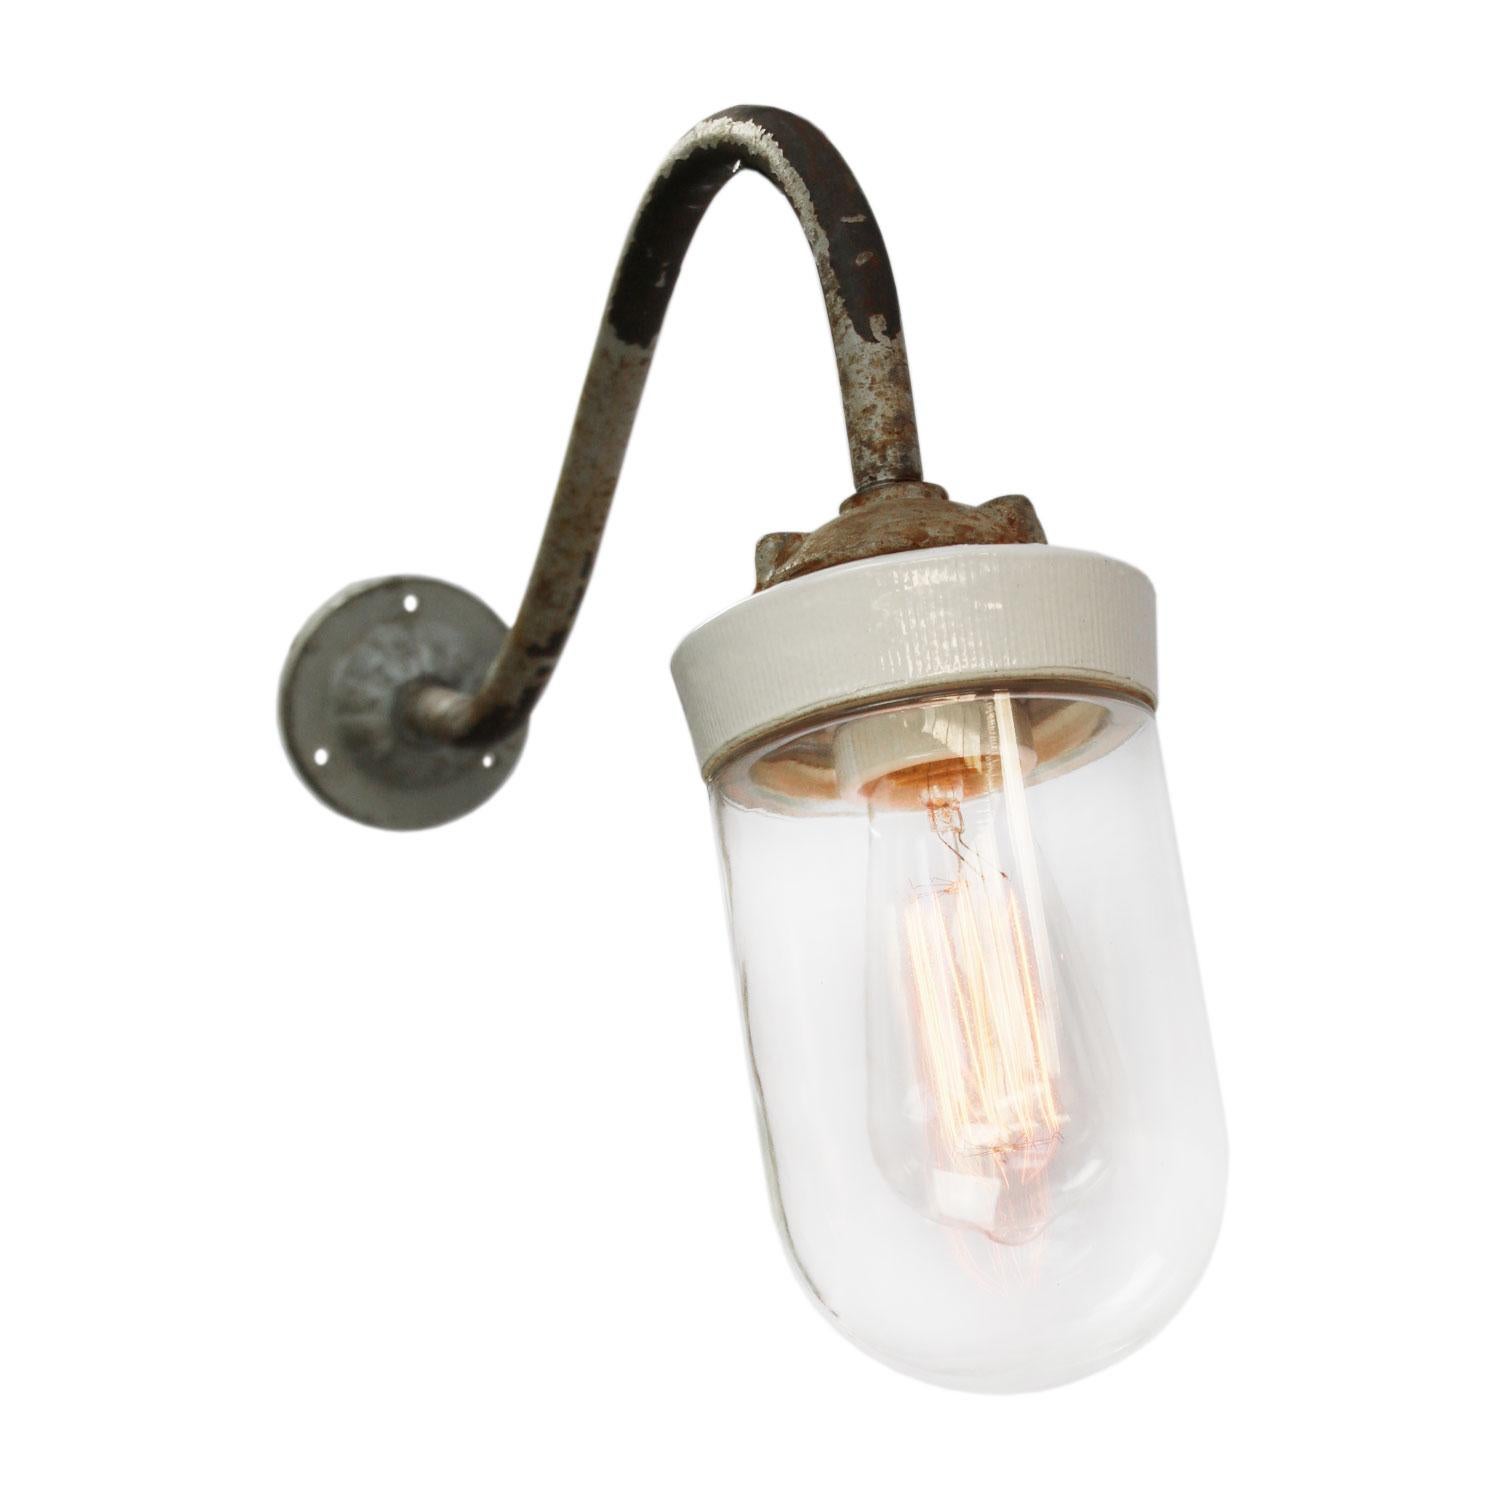 Industrial wall light.
Cast iron and porcelain top, clear glass.
Diameter cast iron wall mount: 9 cm, 3 holes to secure.

Weight: 2.00 kg / 4.4 lb

Priced per individual item. All lamps have been made suitable by international standards for